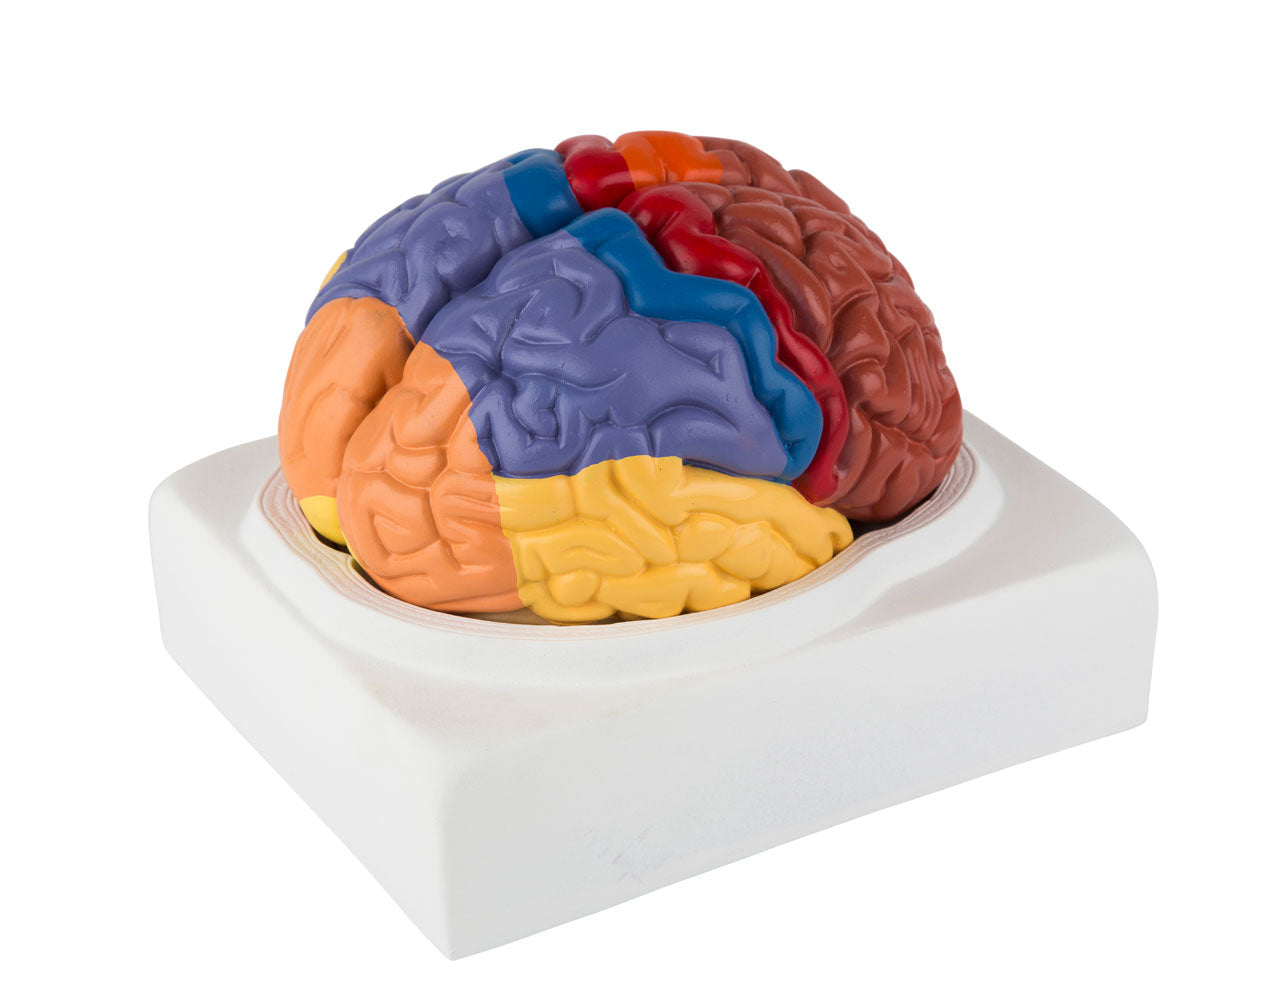 Simple brain model with the most important areas in educational colors. Can be separated into 2 parts